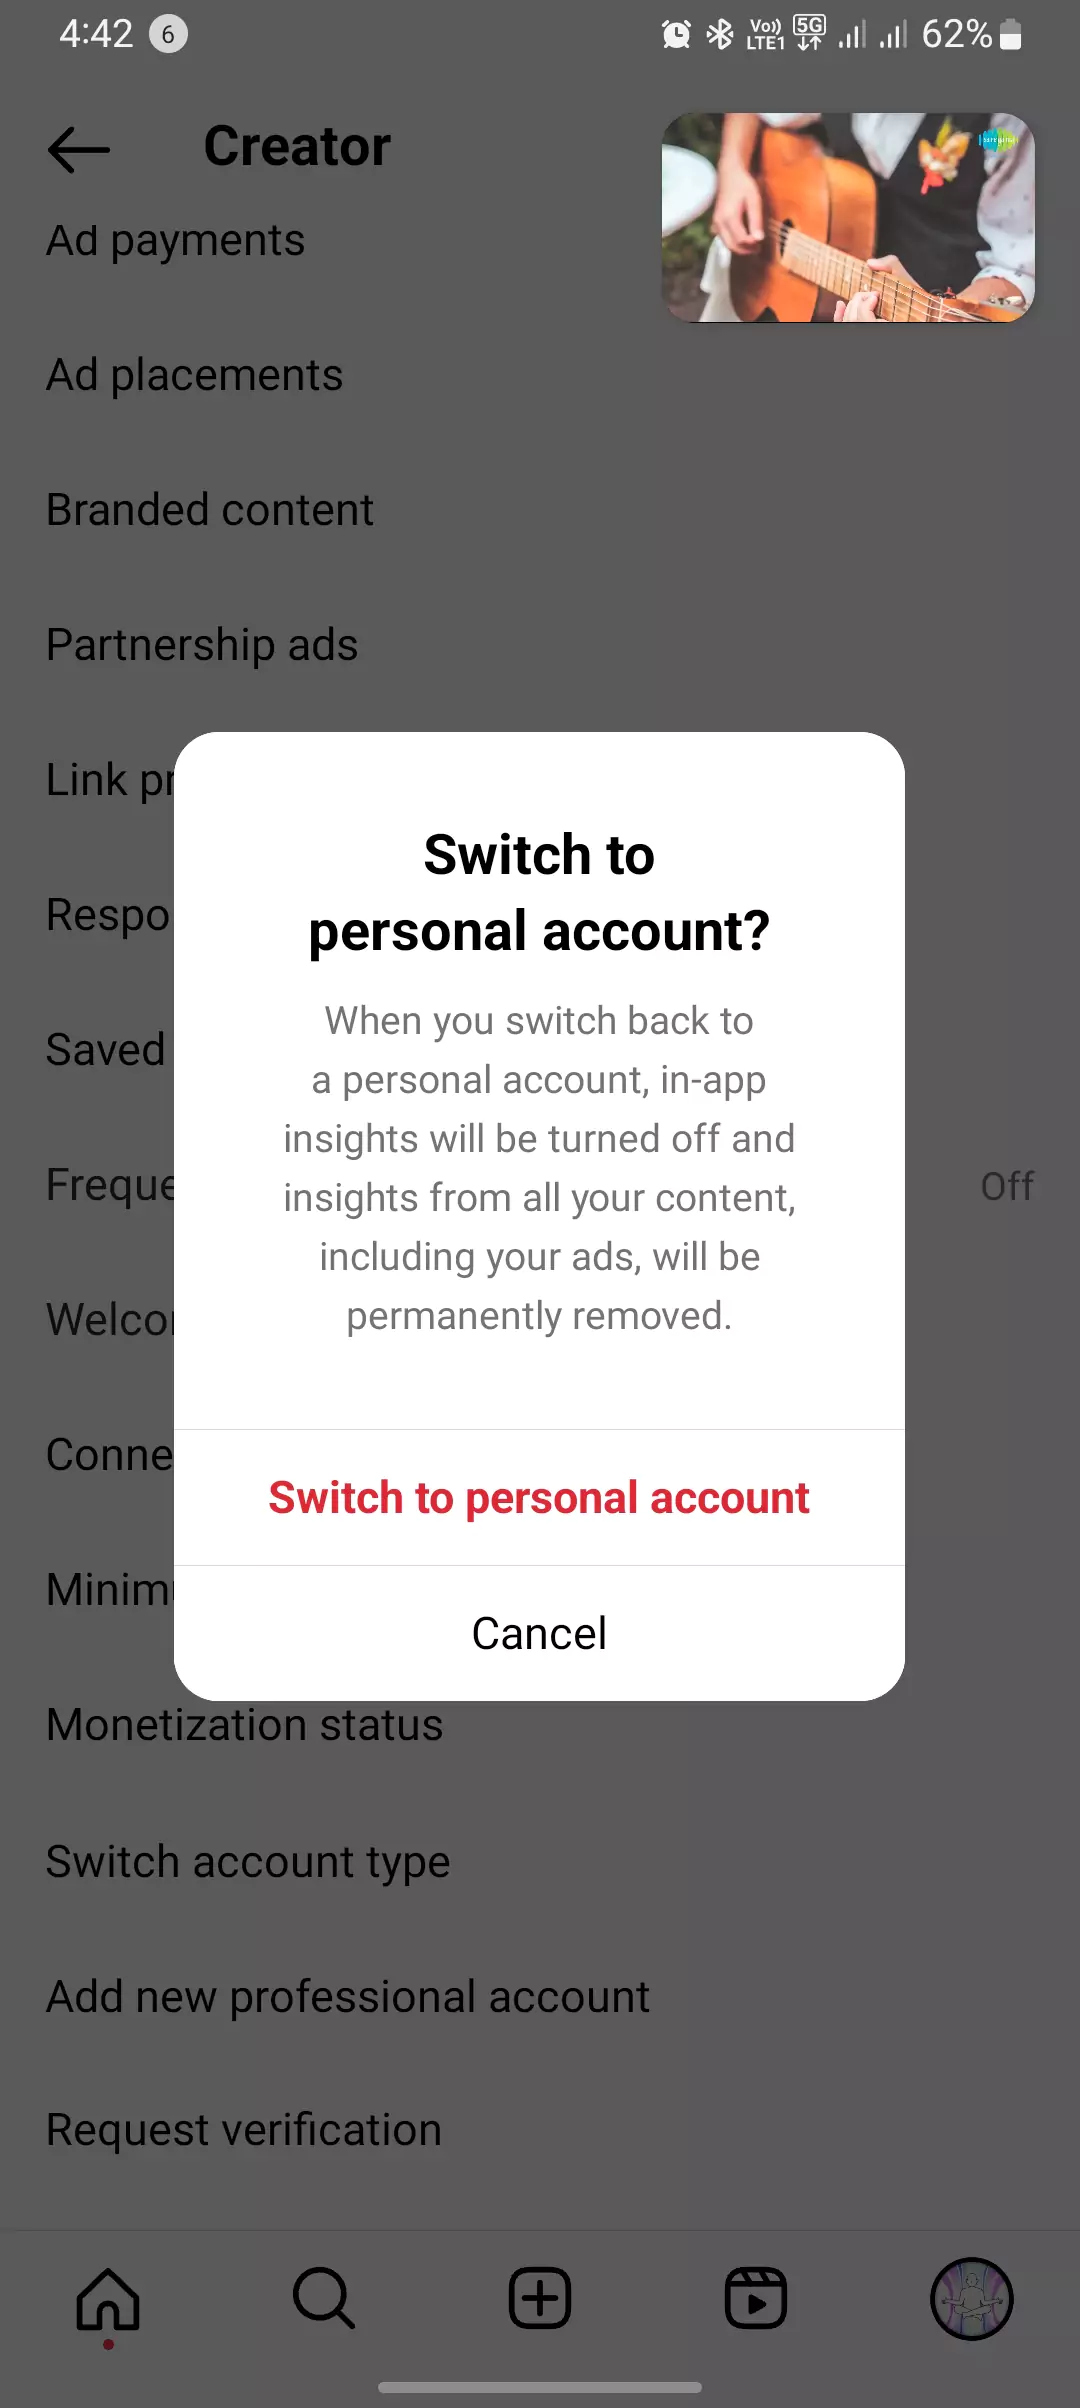 switching to personal account confirmation dialogue box